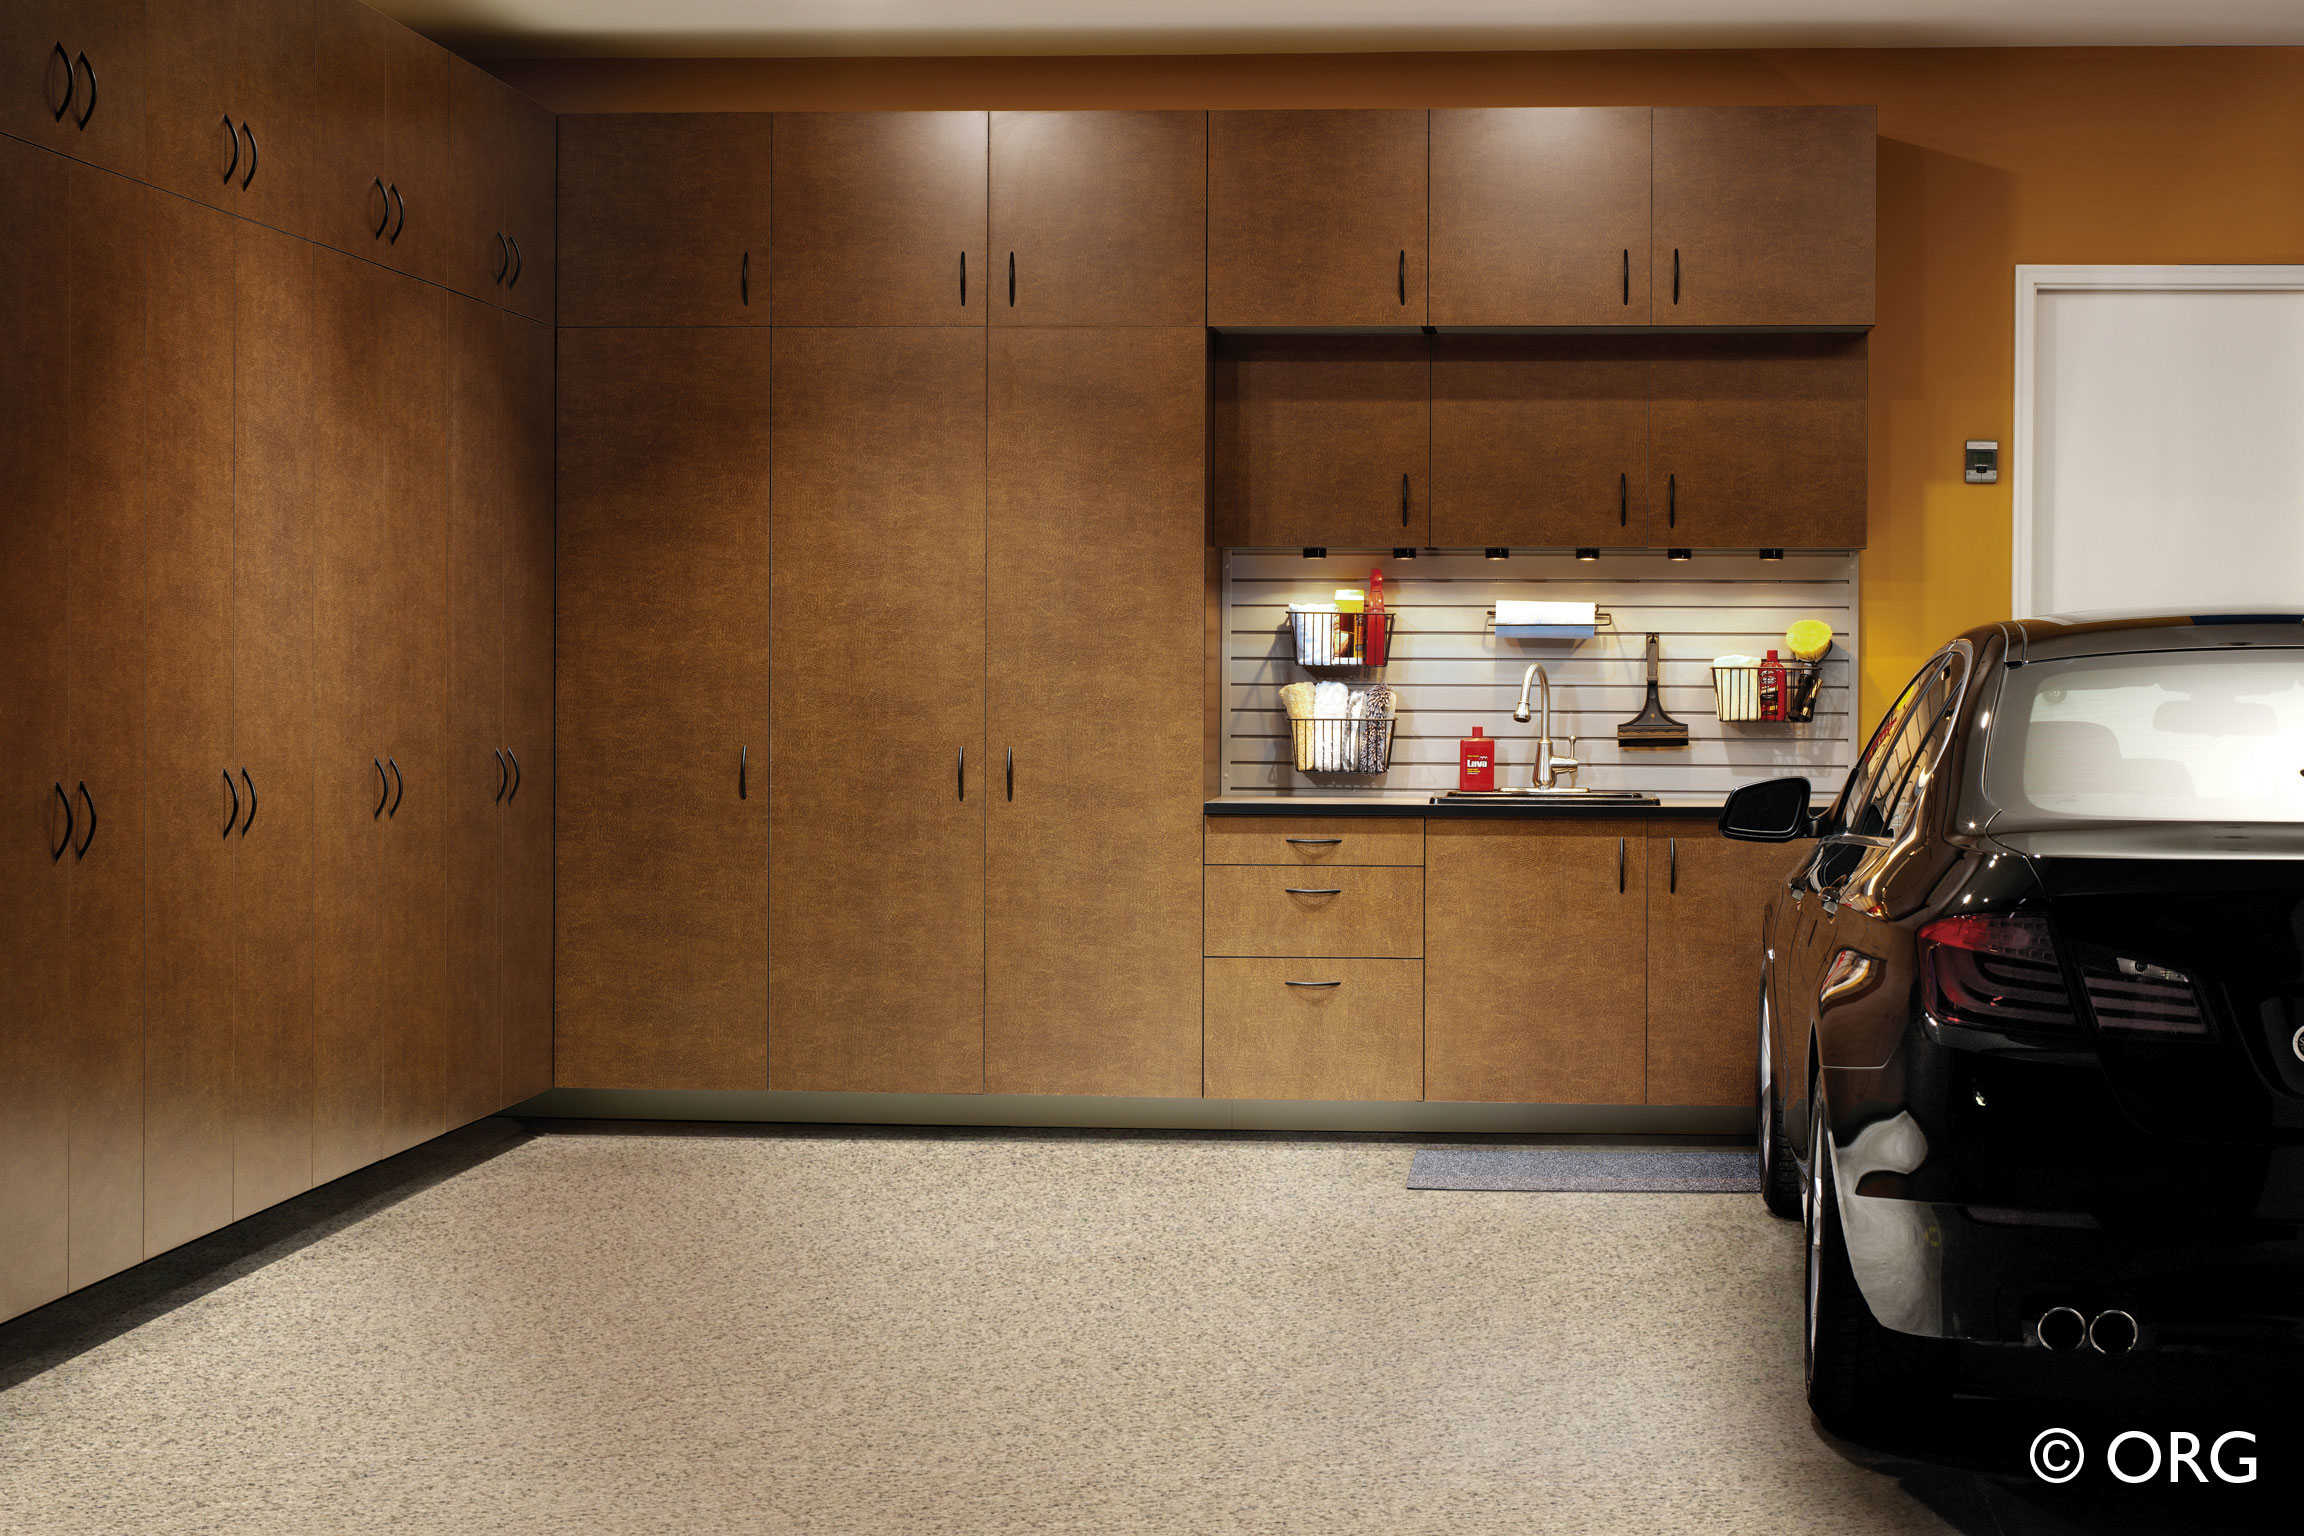 3 Garage Storage Systems to Reclaim Space | SpaceMakers